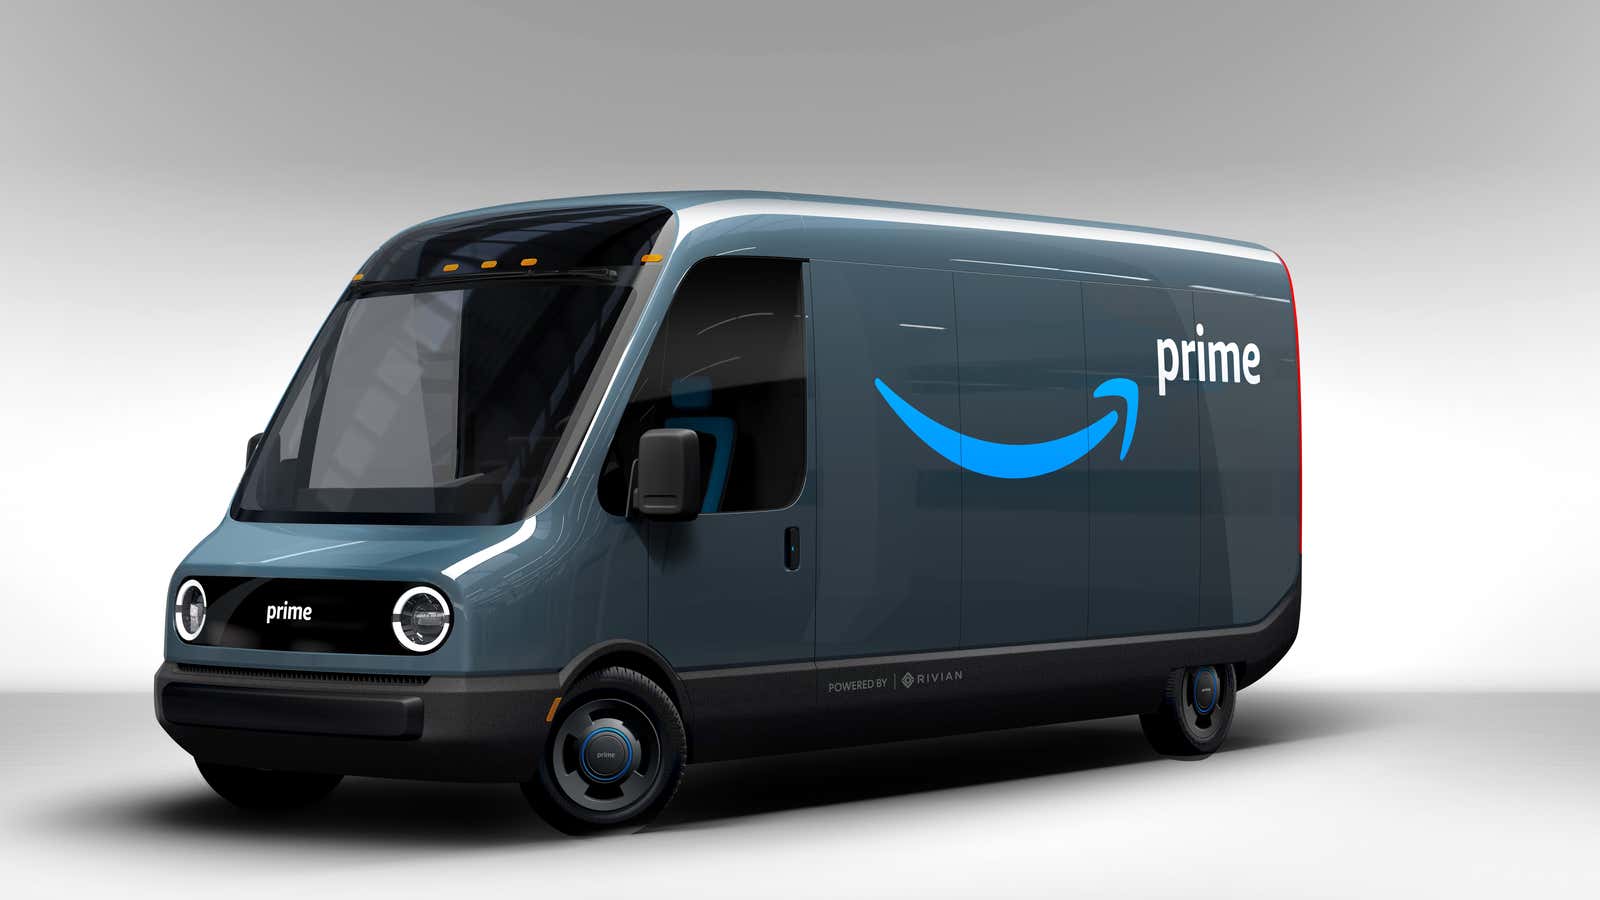 The new face of Amazon delivery